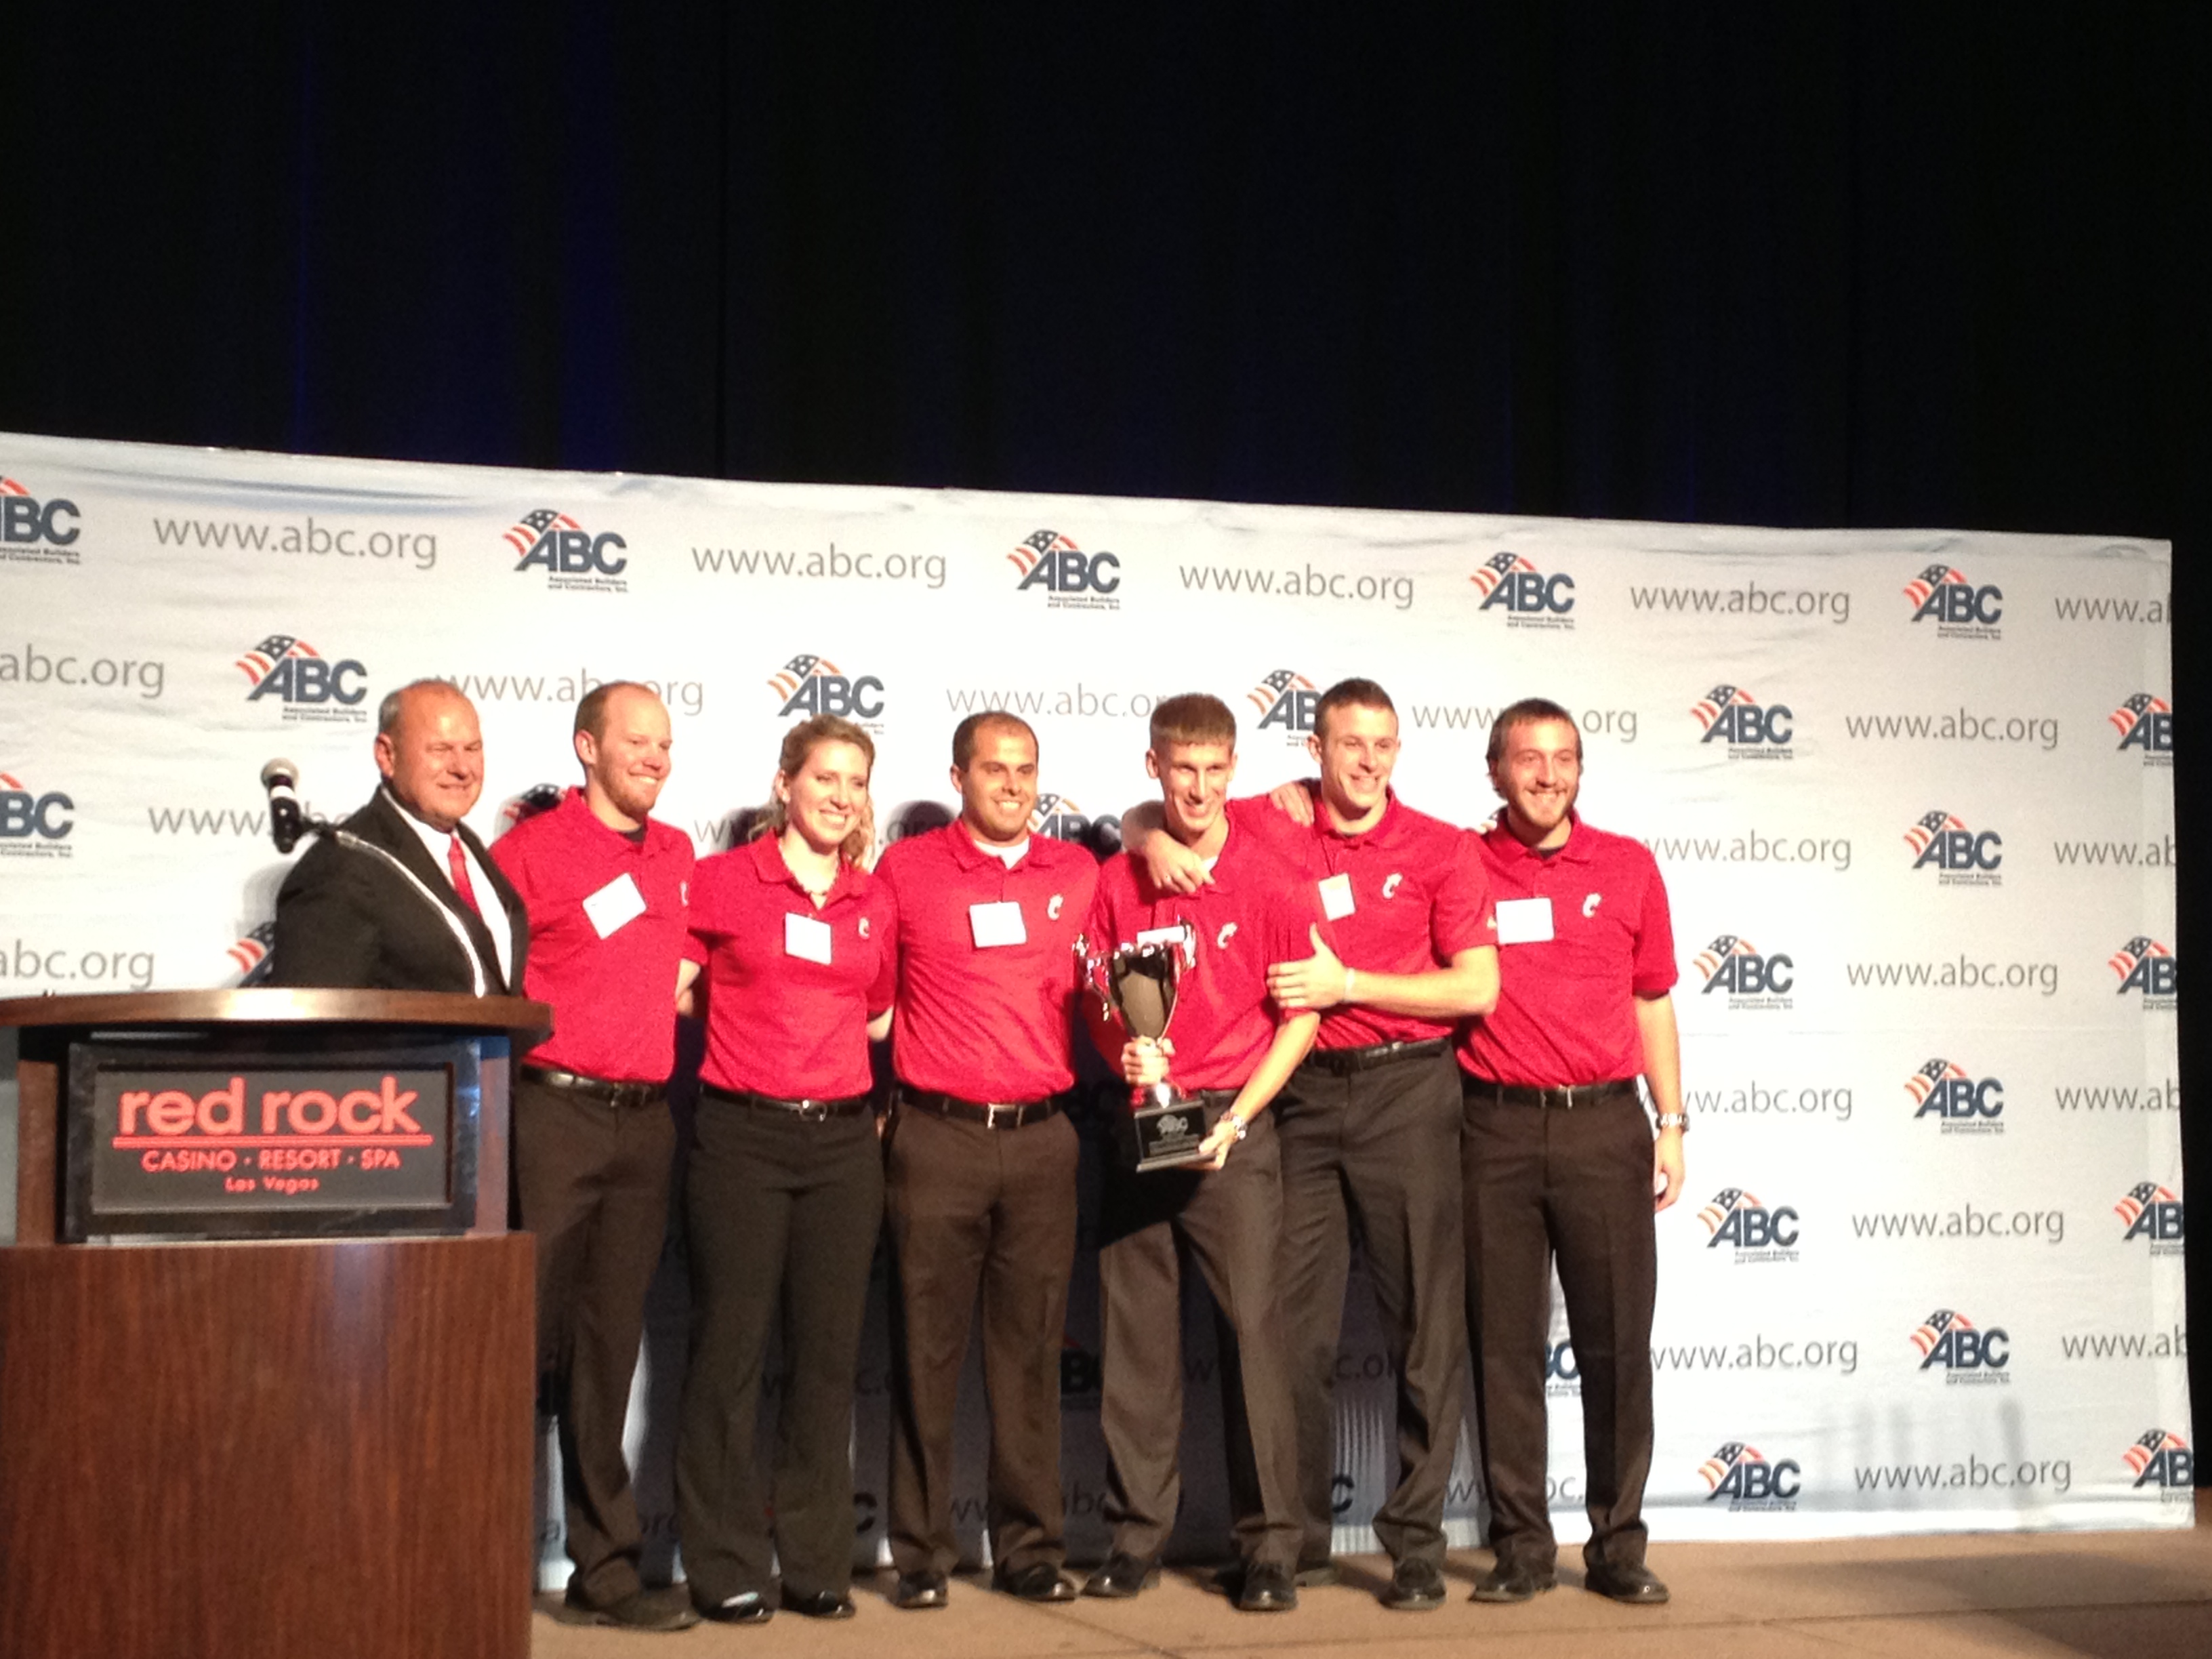 The University of Cincinnati Student Chapter team accepts their award for first-place from ABC National Chairman, Greg Hoberock.